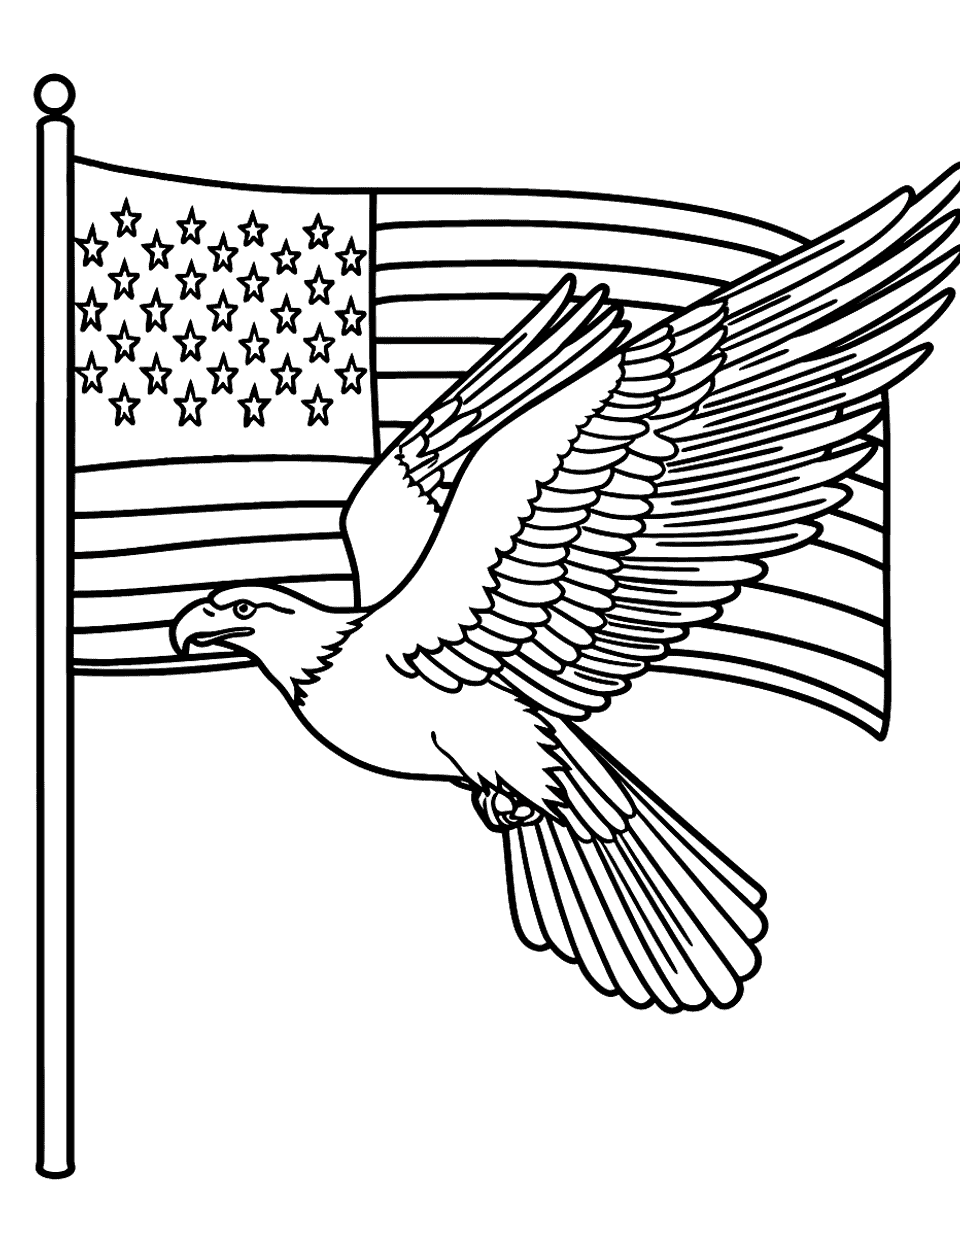 Eagle in front of the Flag American Coloring Page - An American eagle flying in front of the United States flag.